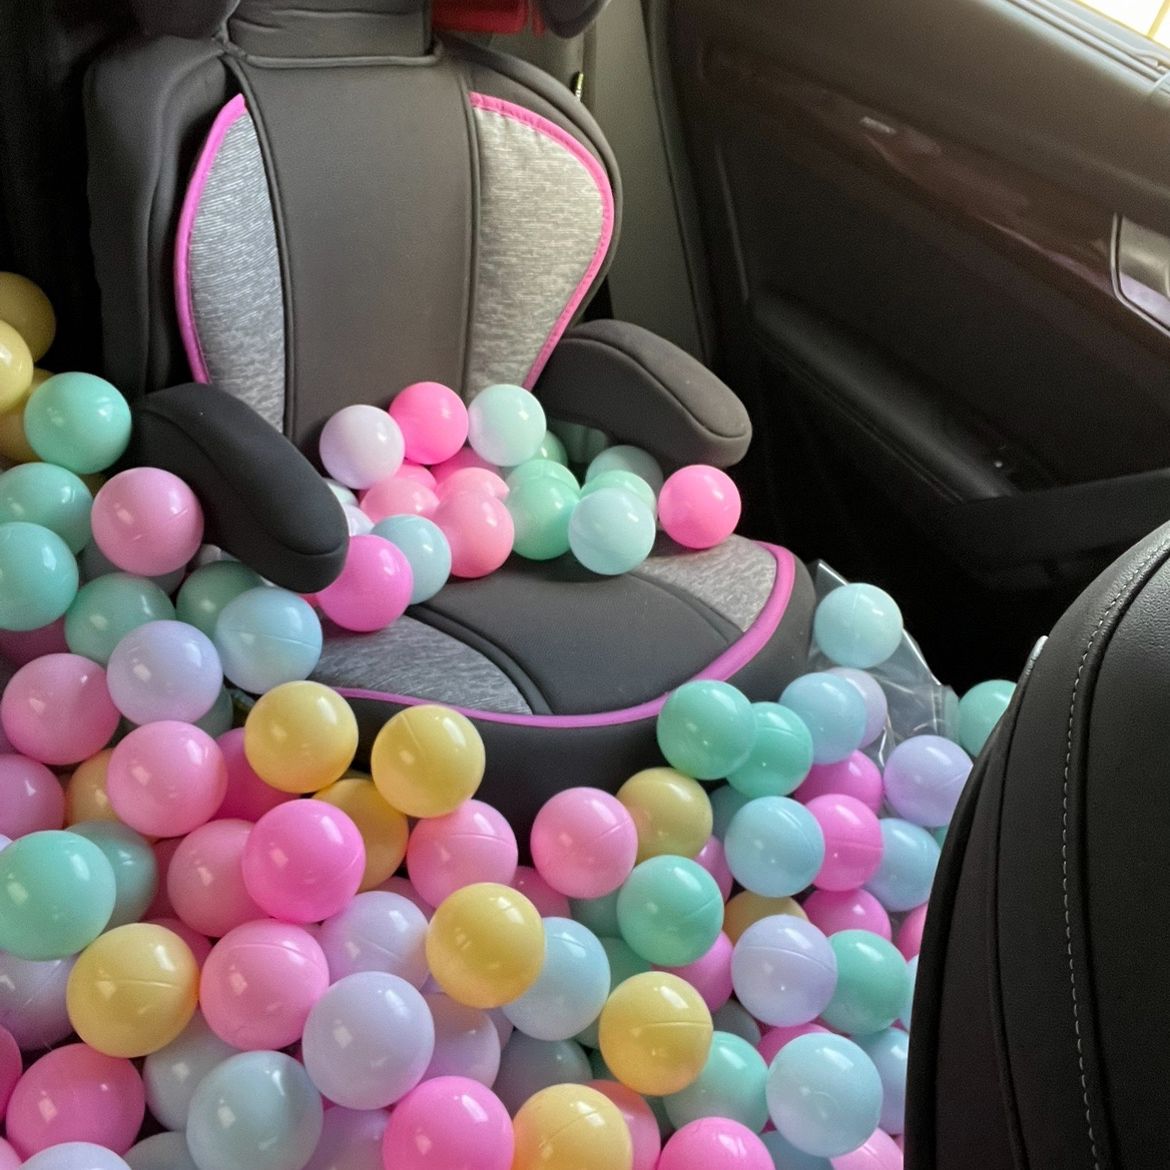 Ball Pit with 1000 Balls